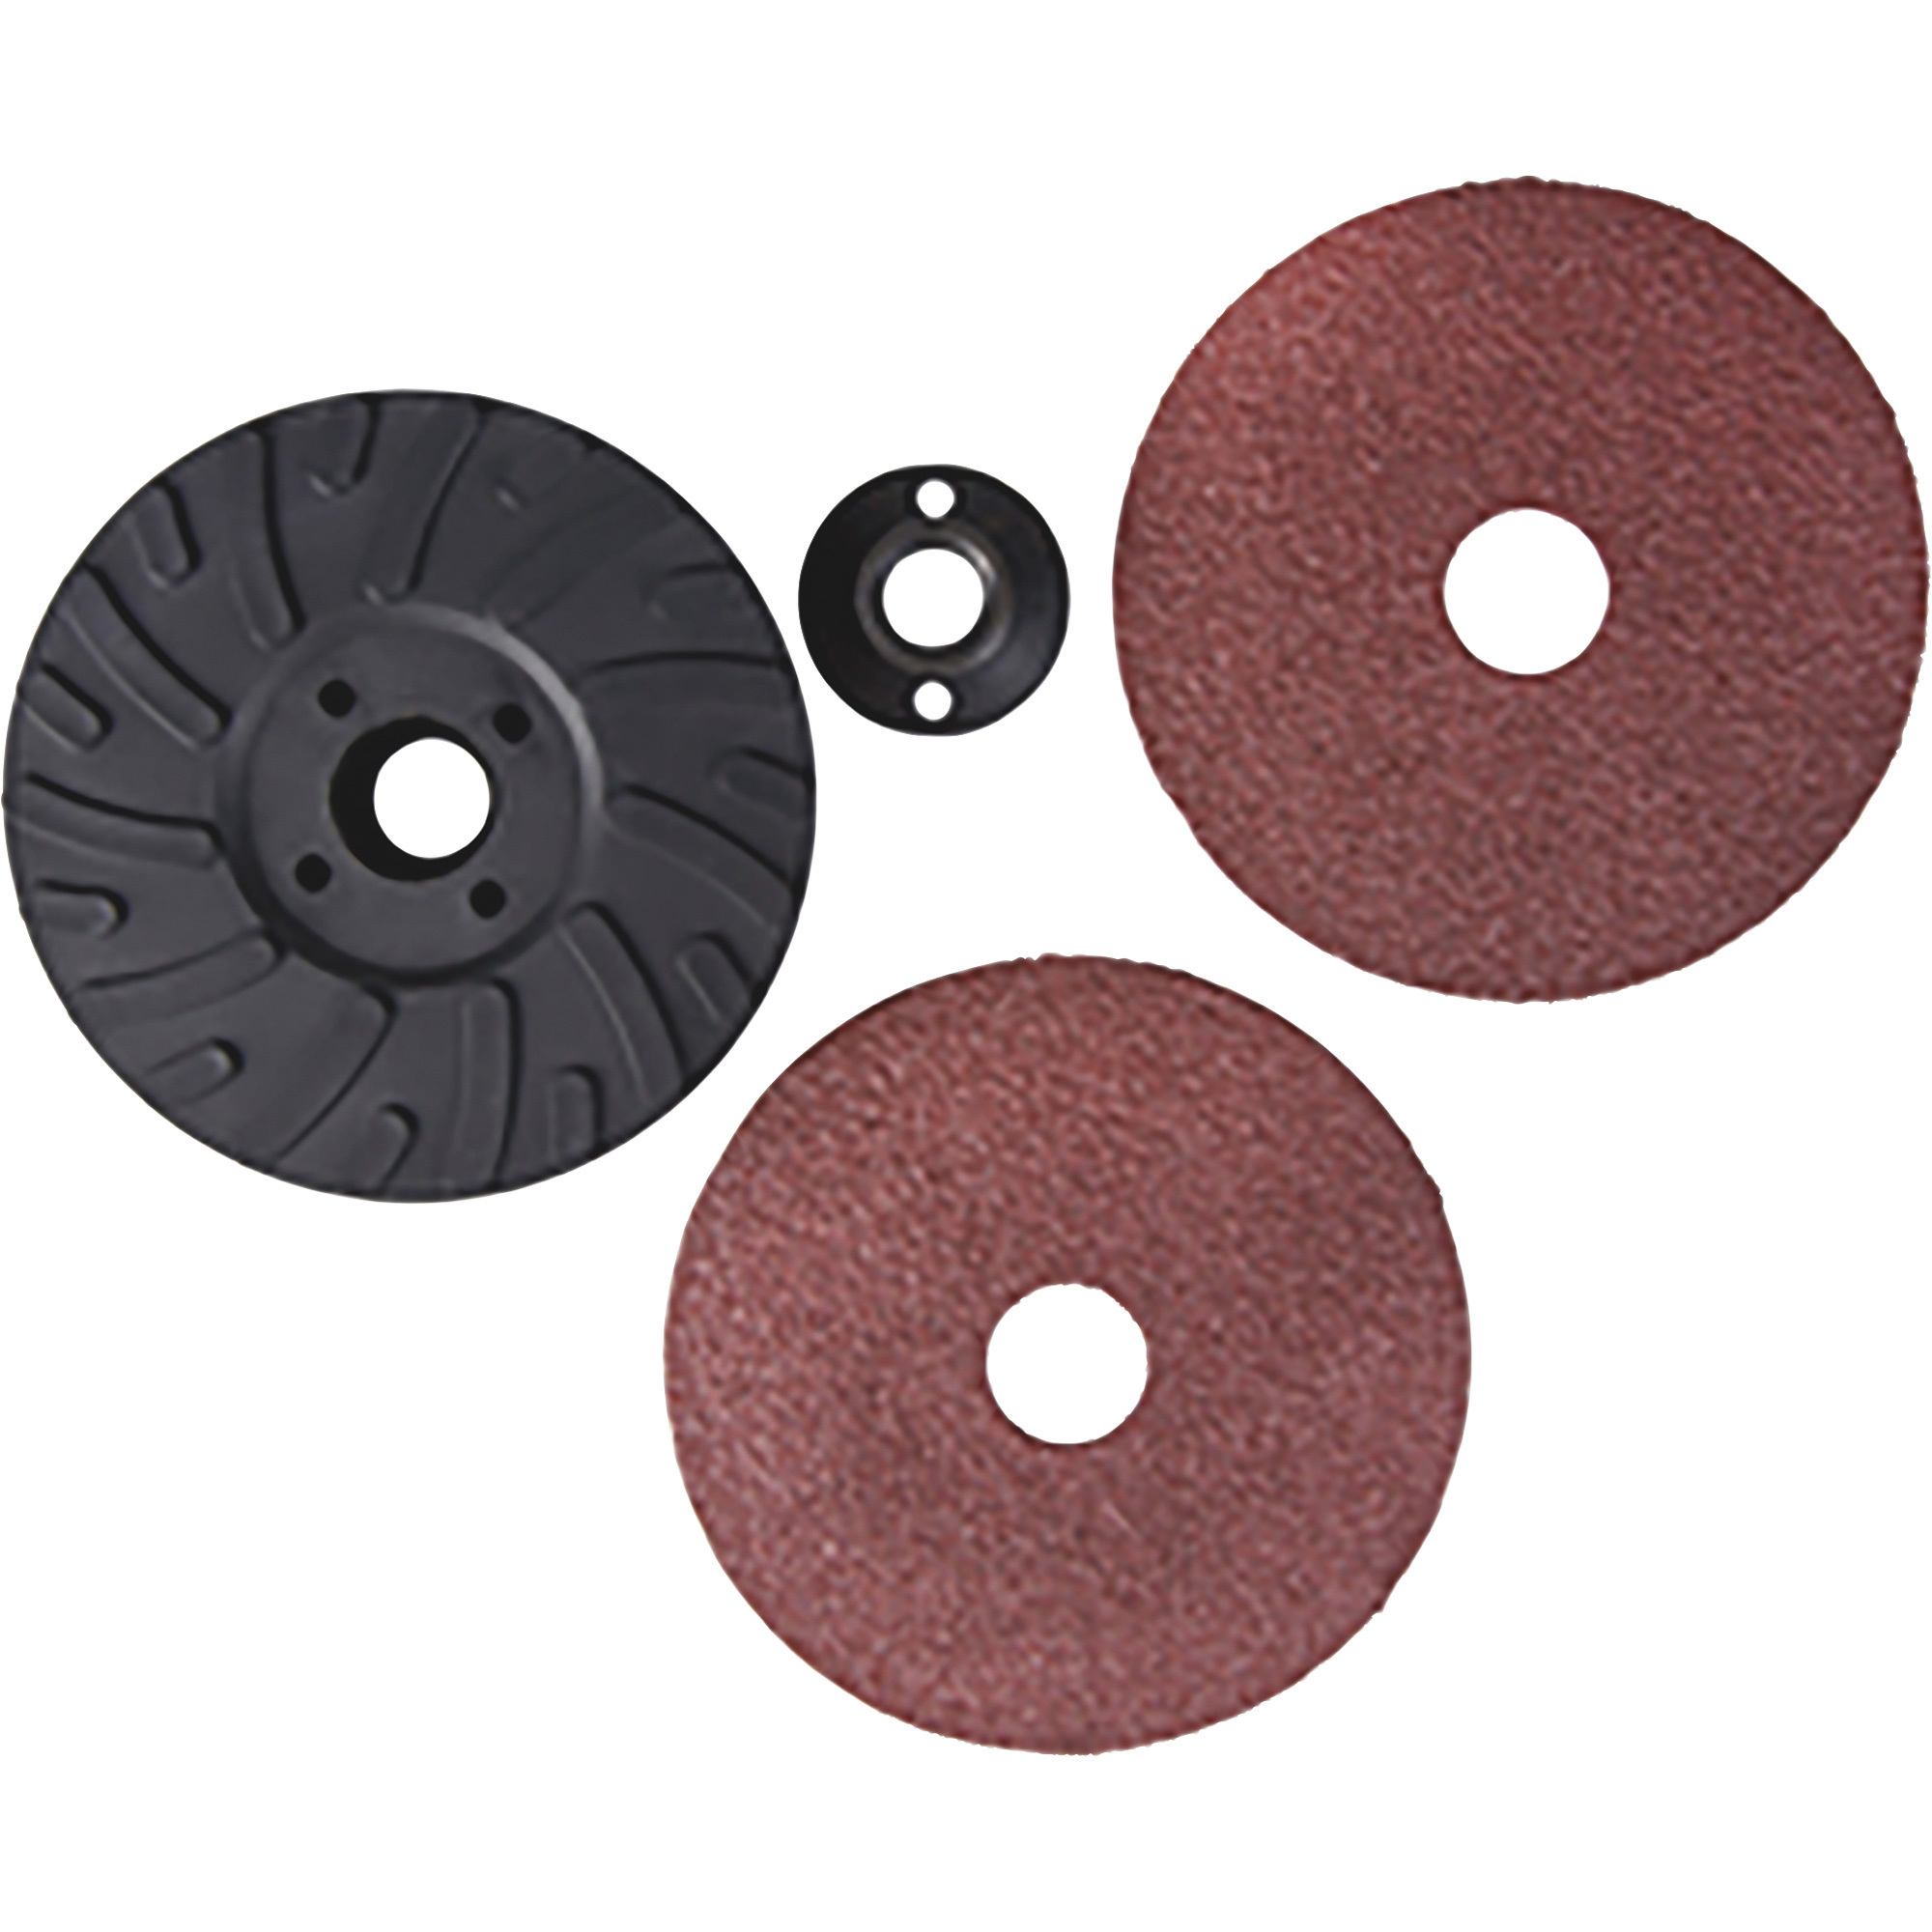 Norton 4 1/2Inch x 5/8Inch-11 Conversion Kit For Use With Fiber Discs, Model 076607-01693-5